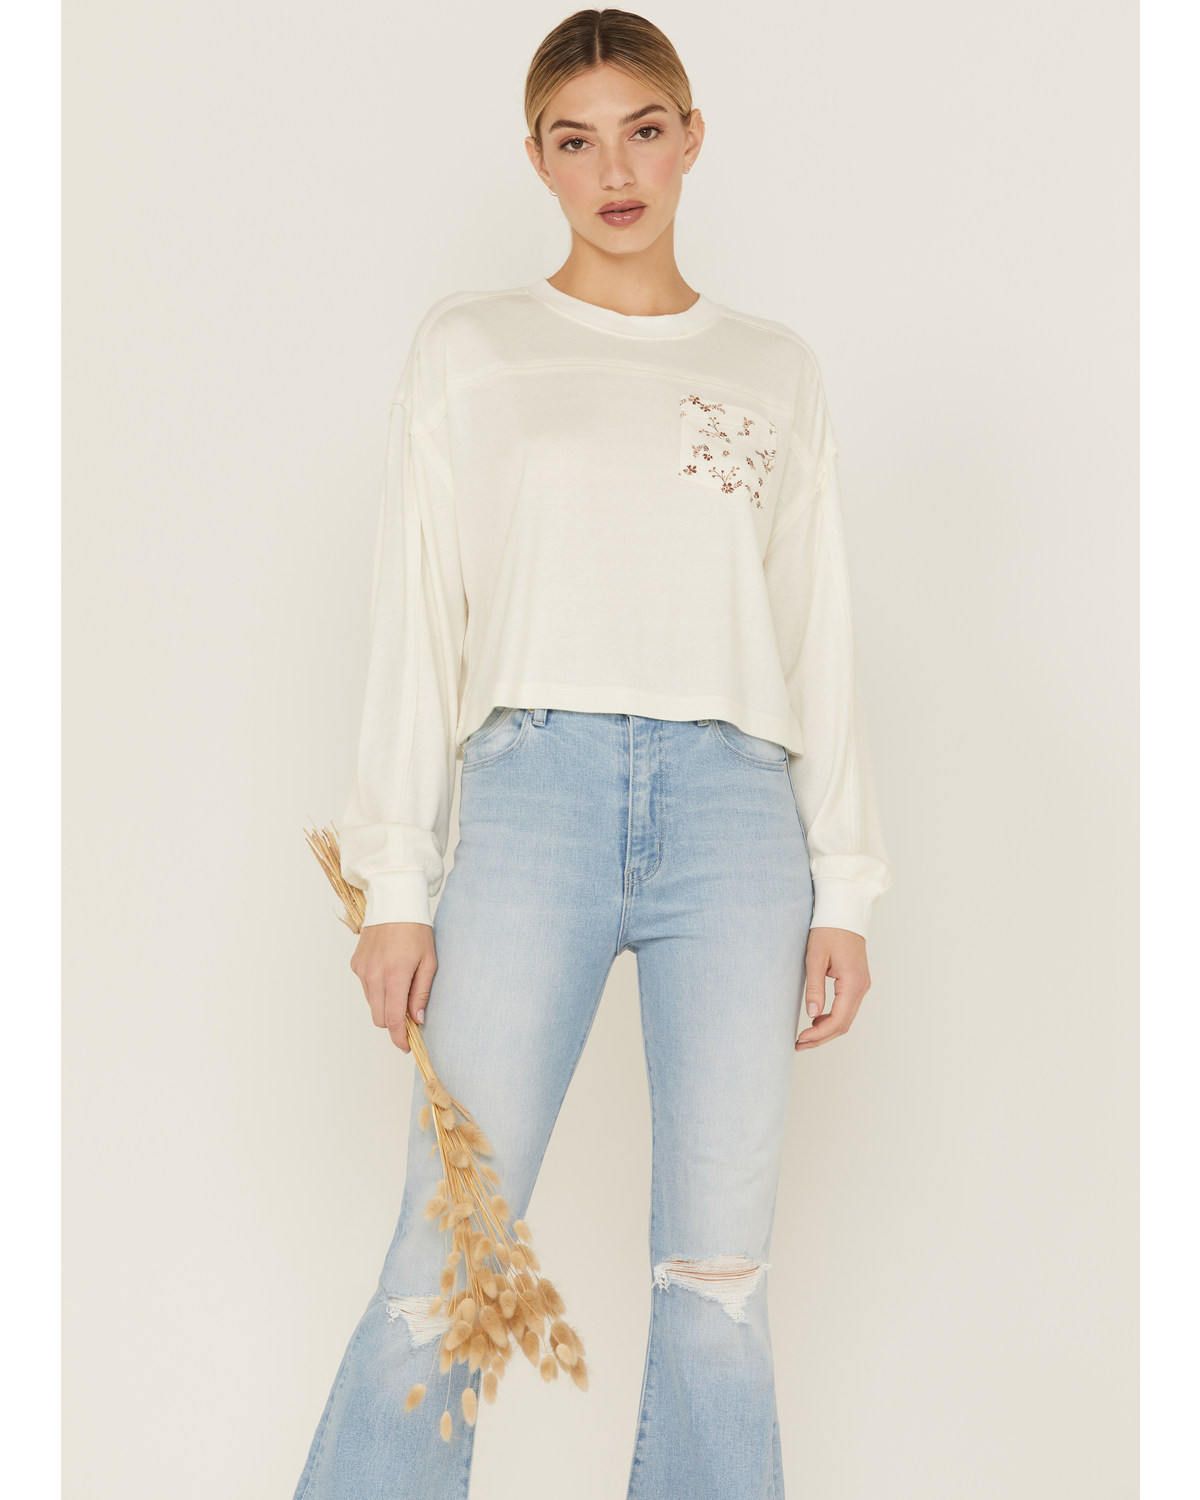 Cleo + Wolf Women's Boxy Floral Pocket Long Sleeve Cropped